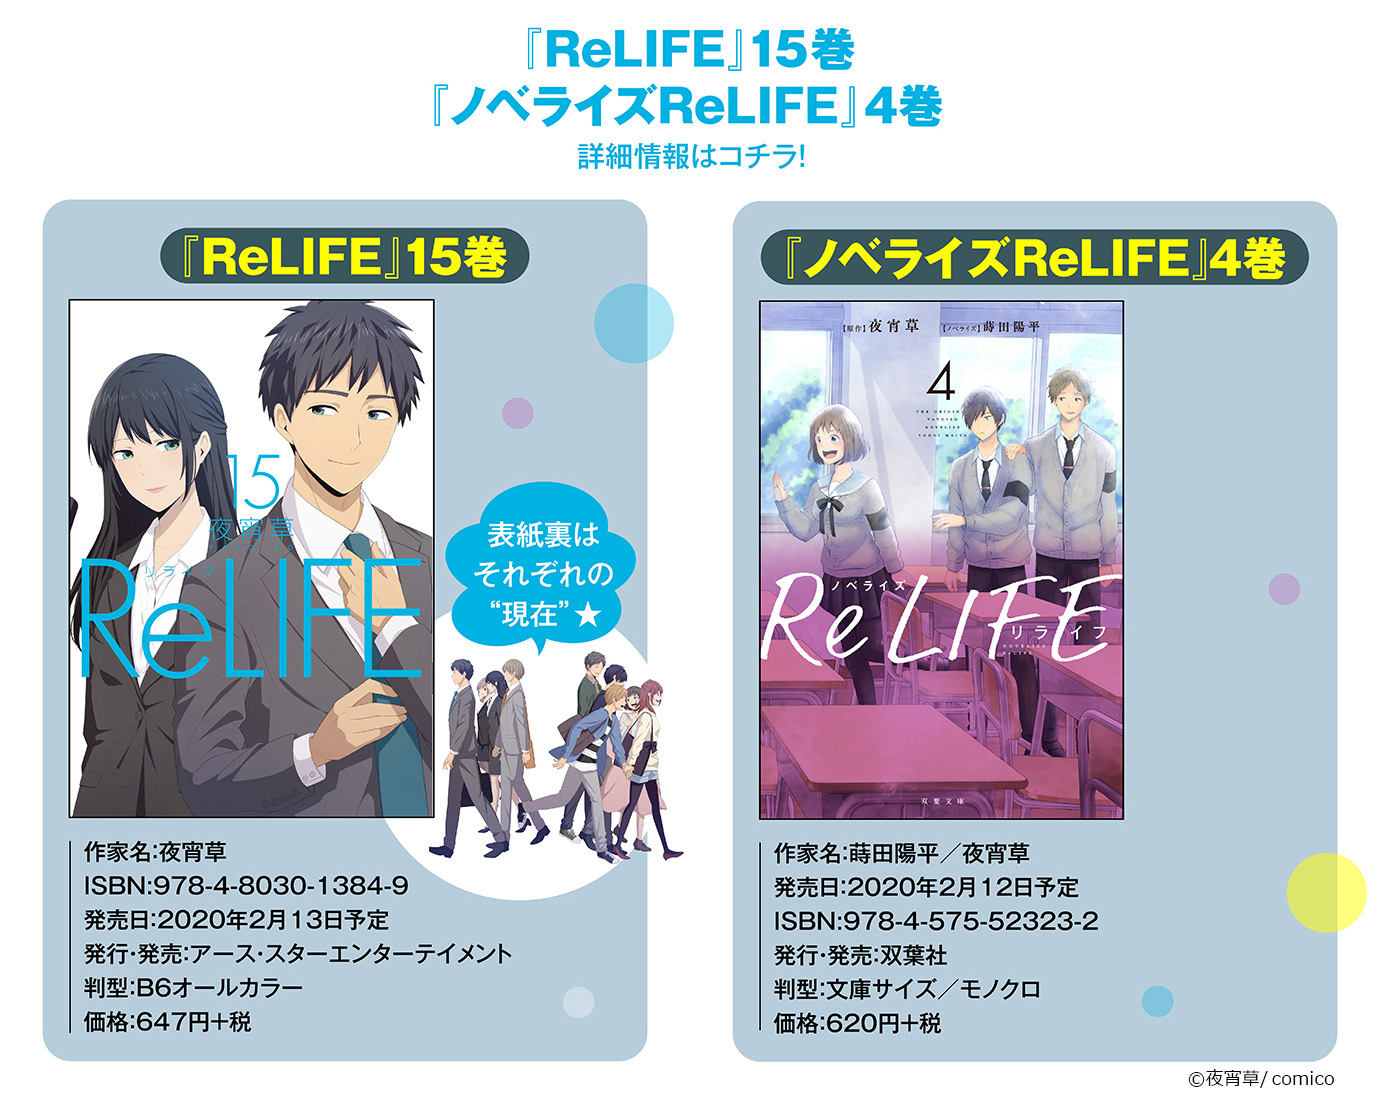 Relife アニメ公式 Relife Anime Twitter